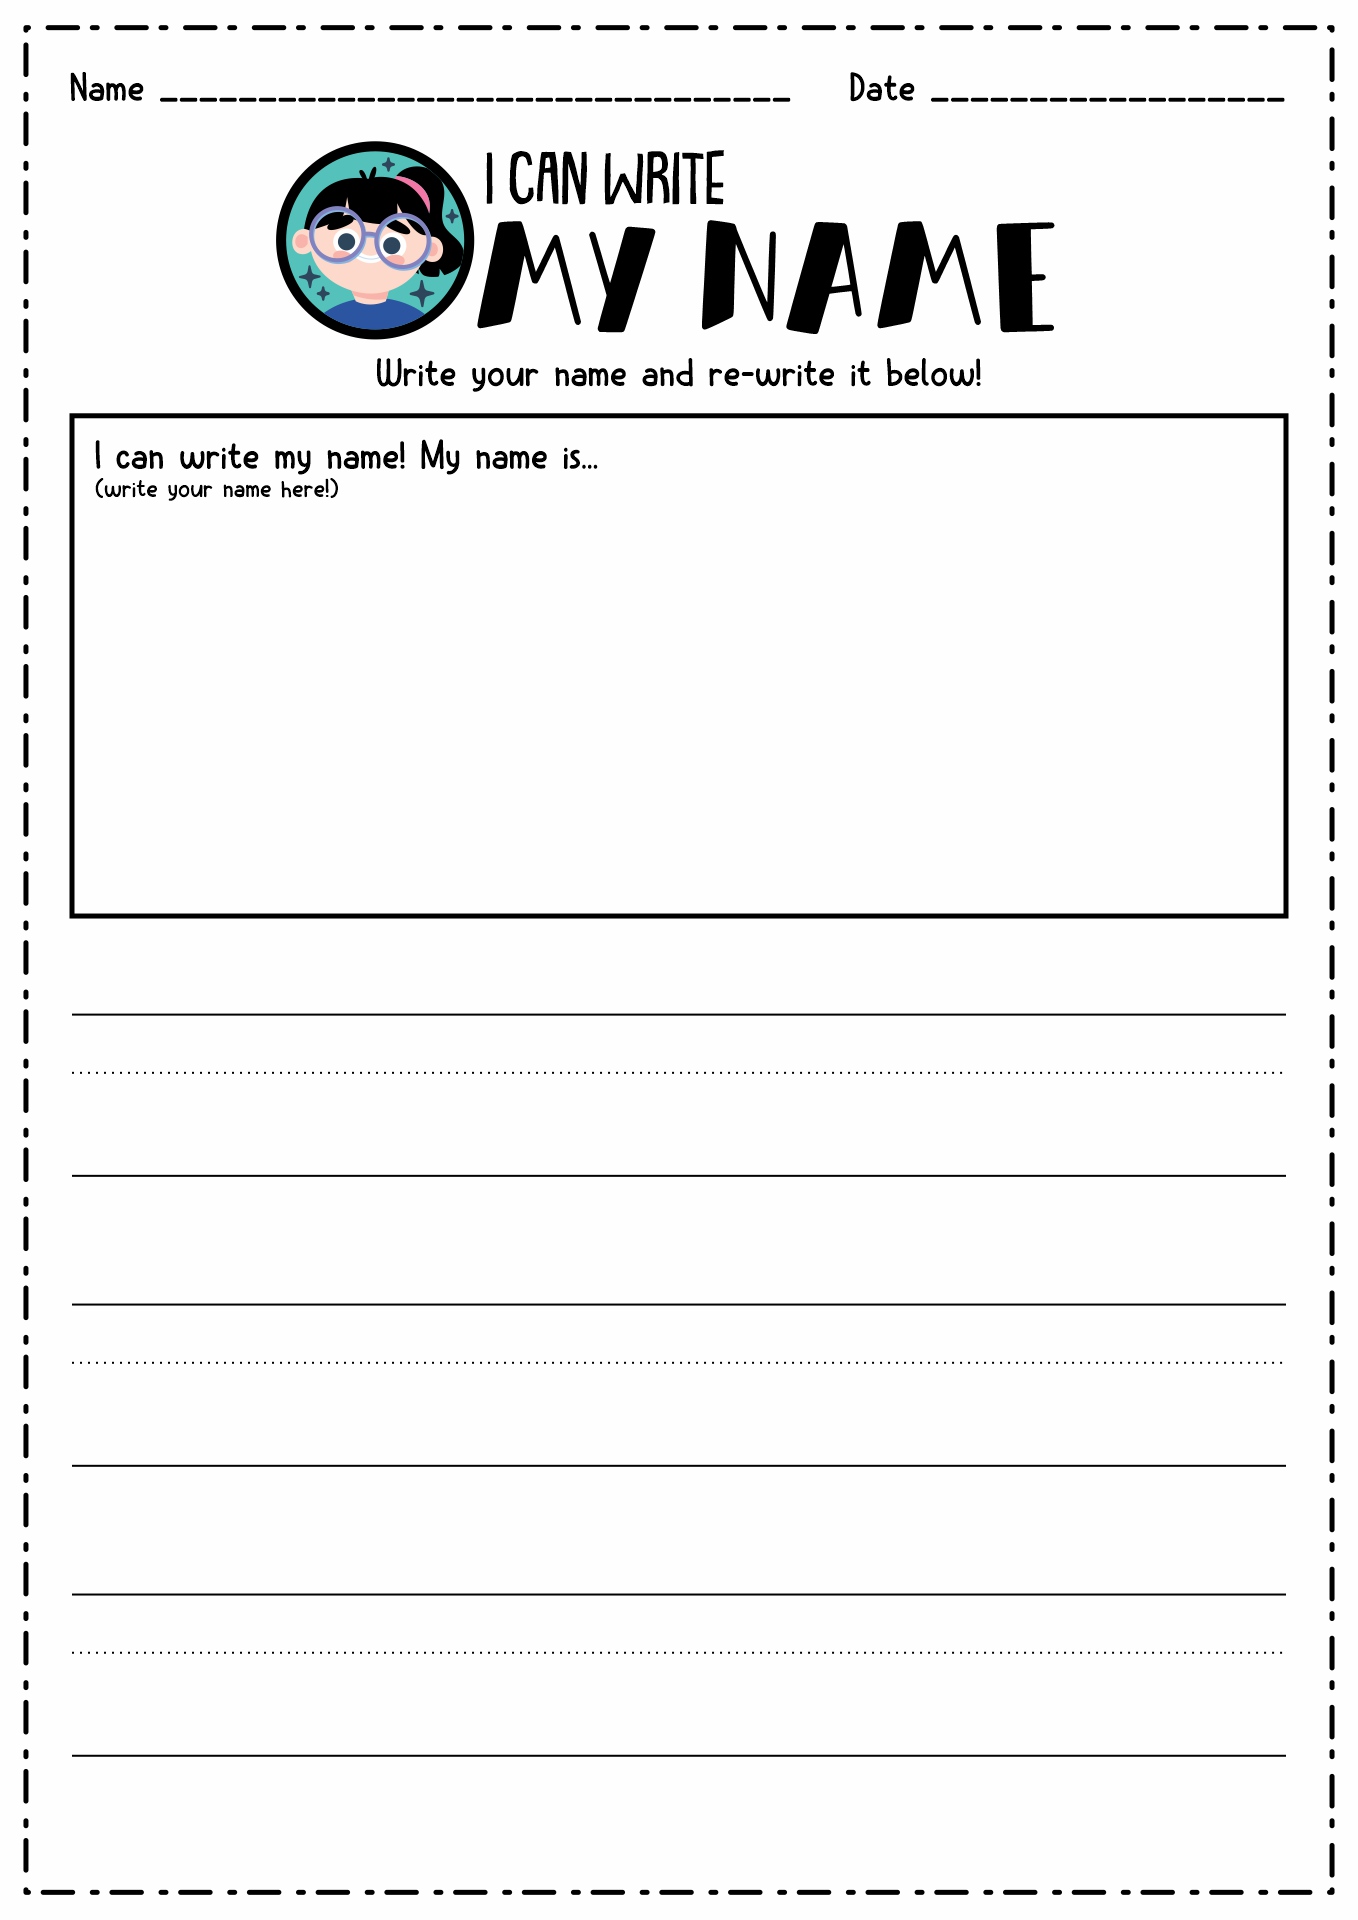 14 Best Images of Create Name Tracing Worksheets  Create Your Own Tracing Name Worksheet, Free 